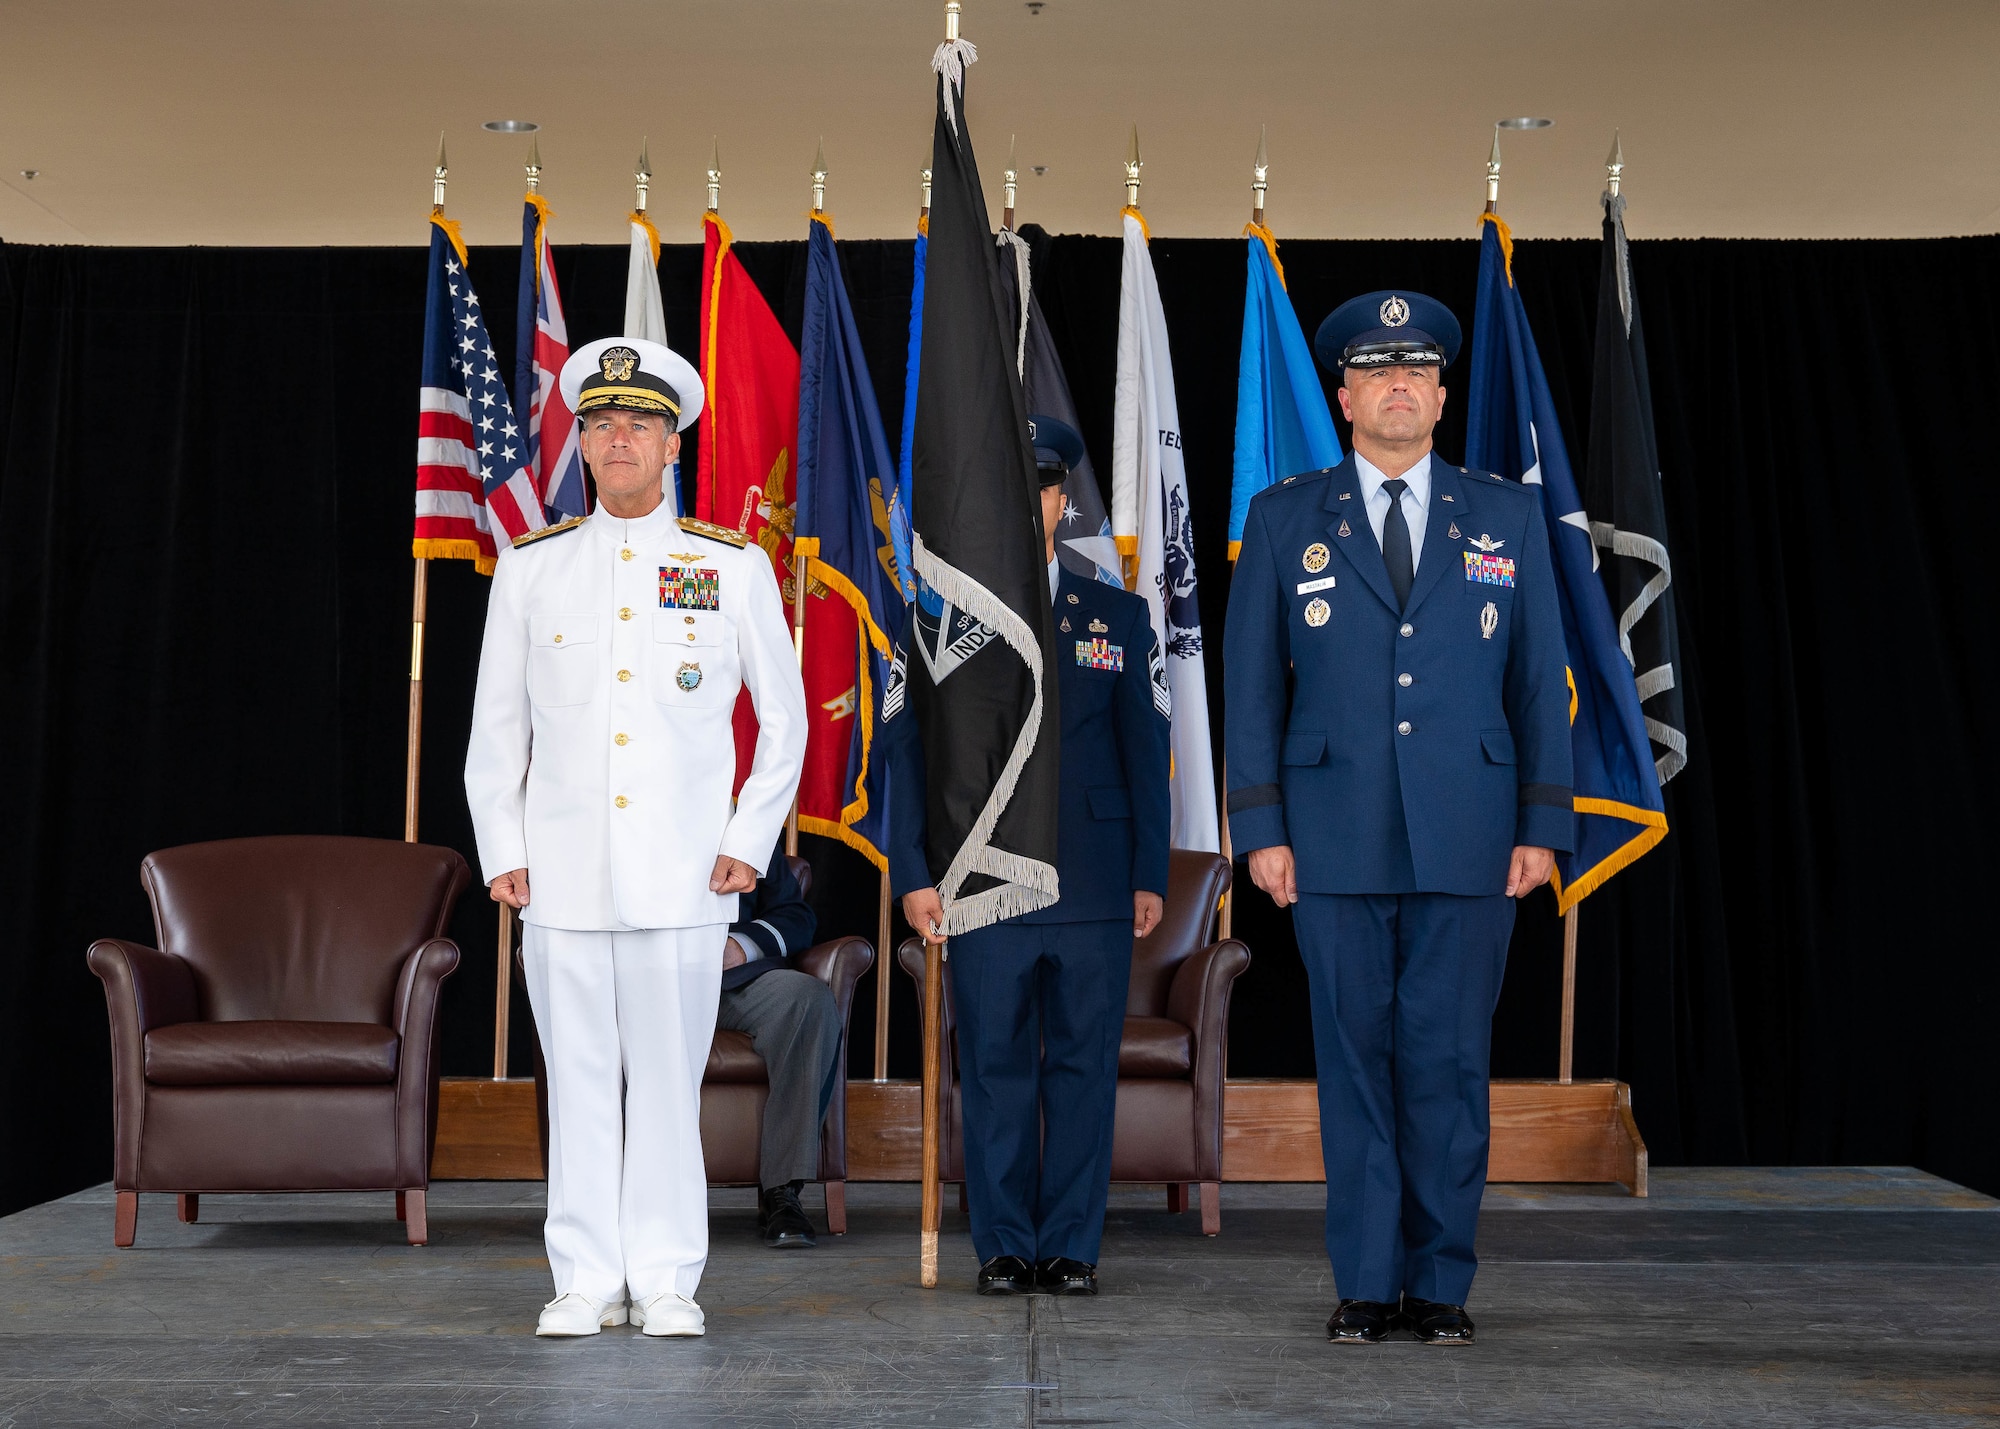 Adm. John C. Aquilino, Commander of U.S. Indo-Pacific Command, left, and Brig. Gen. Anthony J. Mastalir, Commander of United States Space Forces, Indo-Pacific, position for an Assumption of Command ceremony during the USSPACEFORINDOPAC activation ceremony hosted by USINDOPACOM. USSPACEFORINDOPAC will serve as the space-domain authority to USINDOPACOM, advancing the capabilities of the joint force and promoting a free and open Indo-Pacific. (U.S. Navy photo by Mass Communication Specialist 1st Class Anthony J. Rivera)